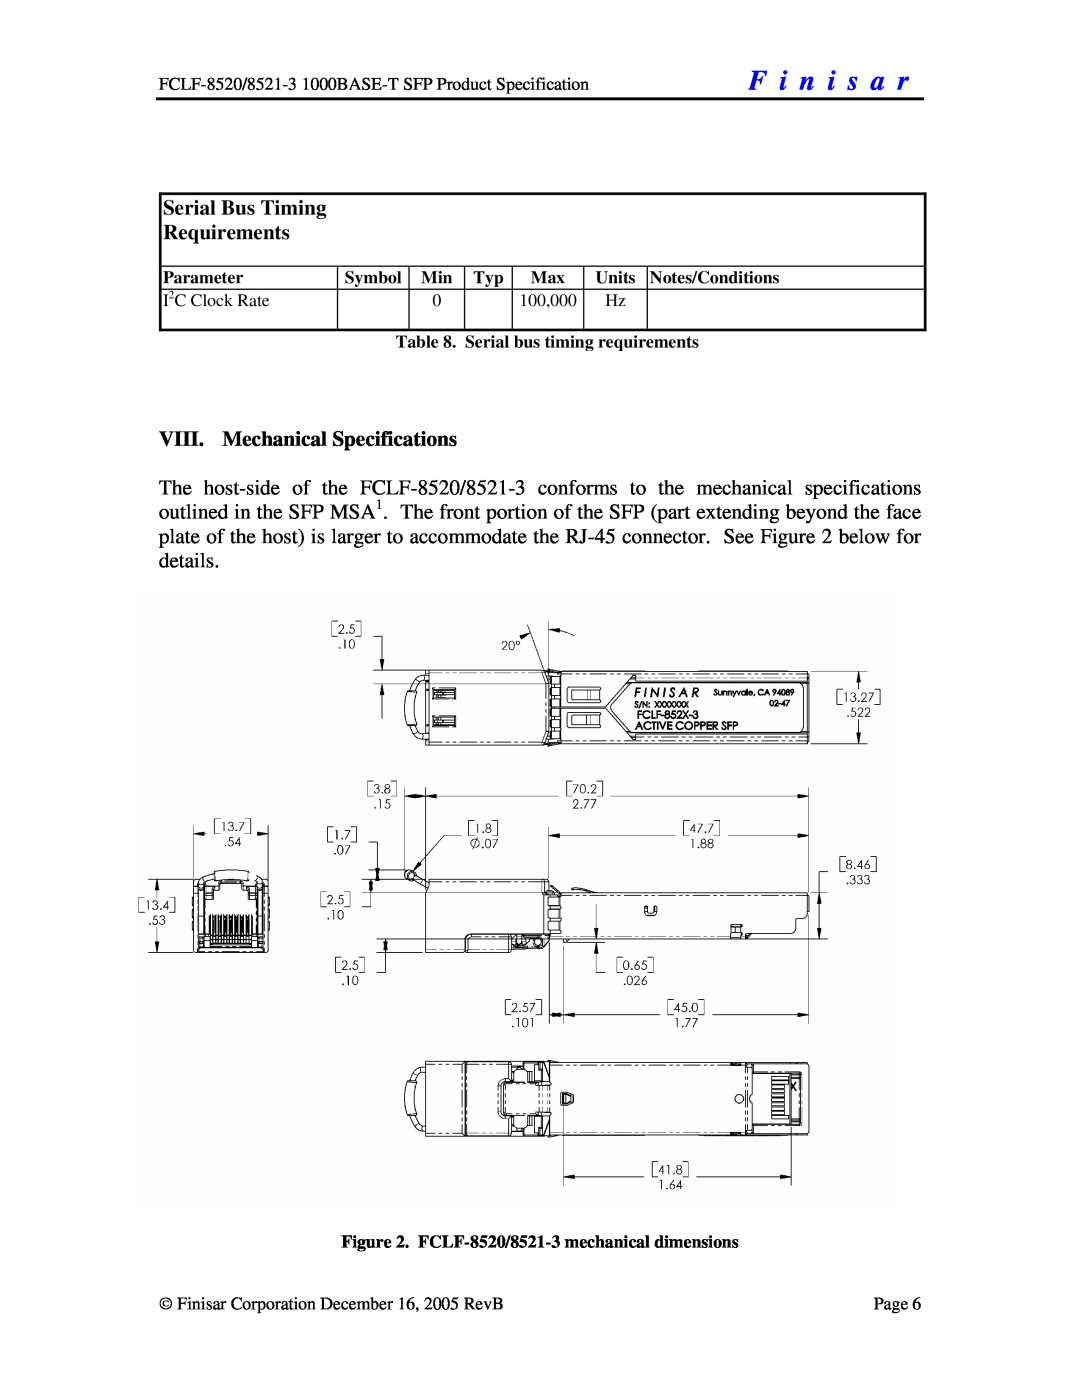 Finisar FCLF-8521-3 manual Serial Bus Timing Requirements, VIII. Mechanical Specifications, F i n i s a r 